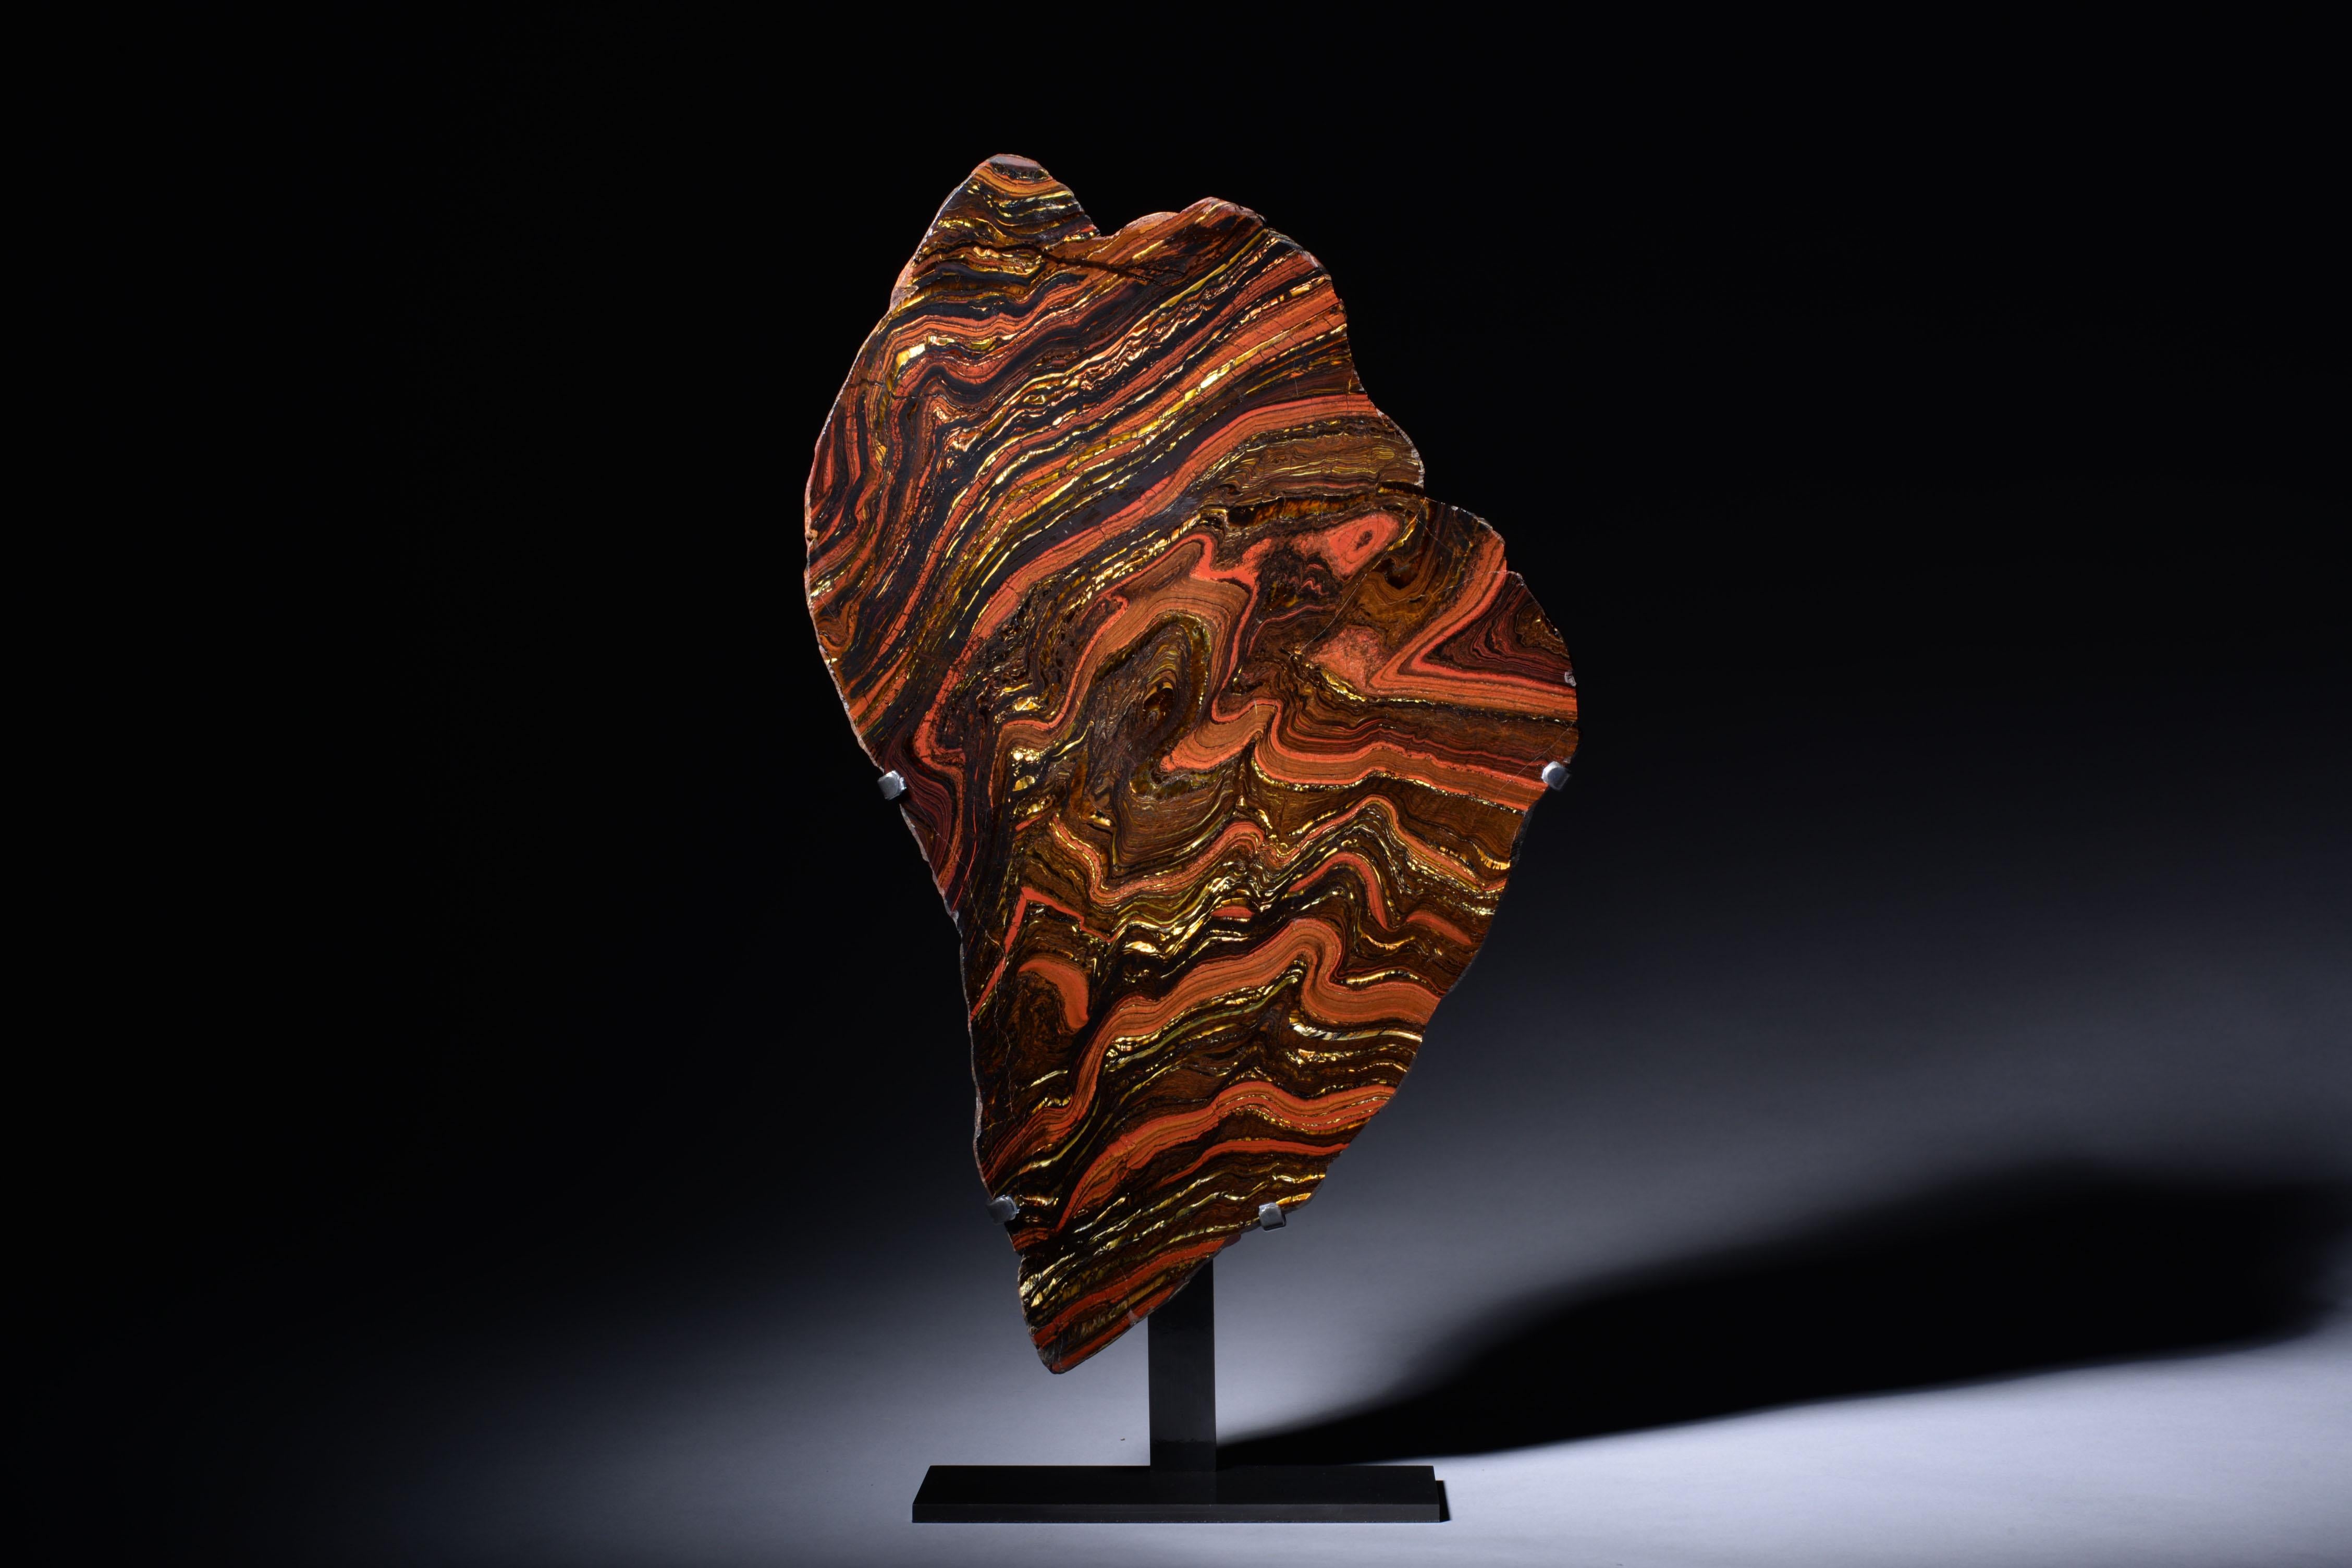 Banded Iron Fossil Formation
Circa 2.9 Billion y/o

This spectacular banded iron formation from Port Hedland, Western Australia, provides evidence of the earliest life on Earth: simple, single-celled bacteria inhabiting our ancient oceans. The